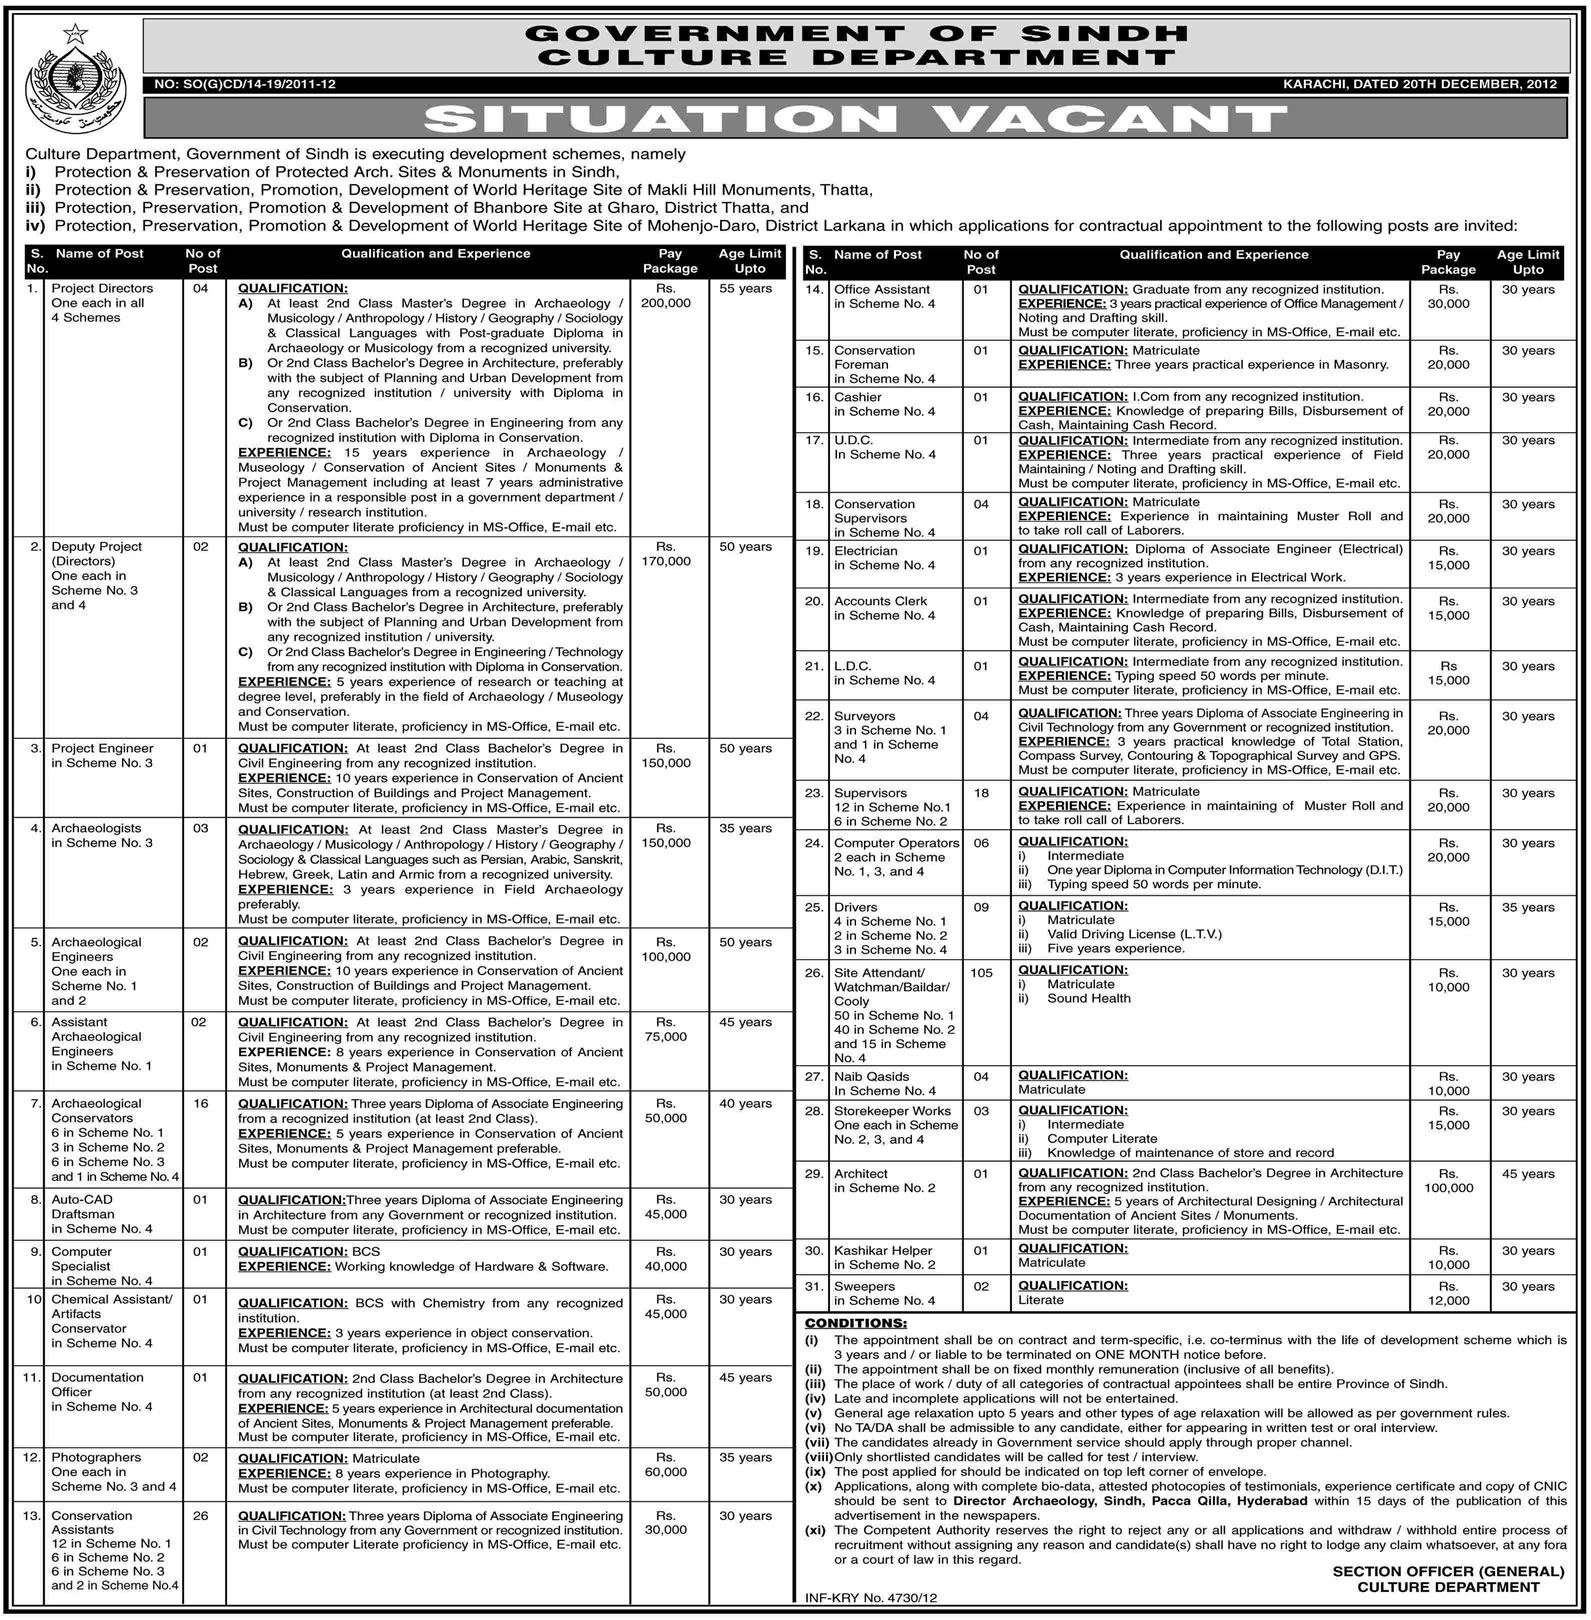 Jobs in Culture Department Sindh 2013-2012 Archaeologists, Conservators, Engineers, Directors, Supervisors & Other Staff